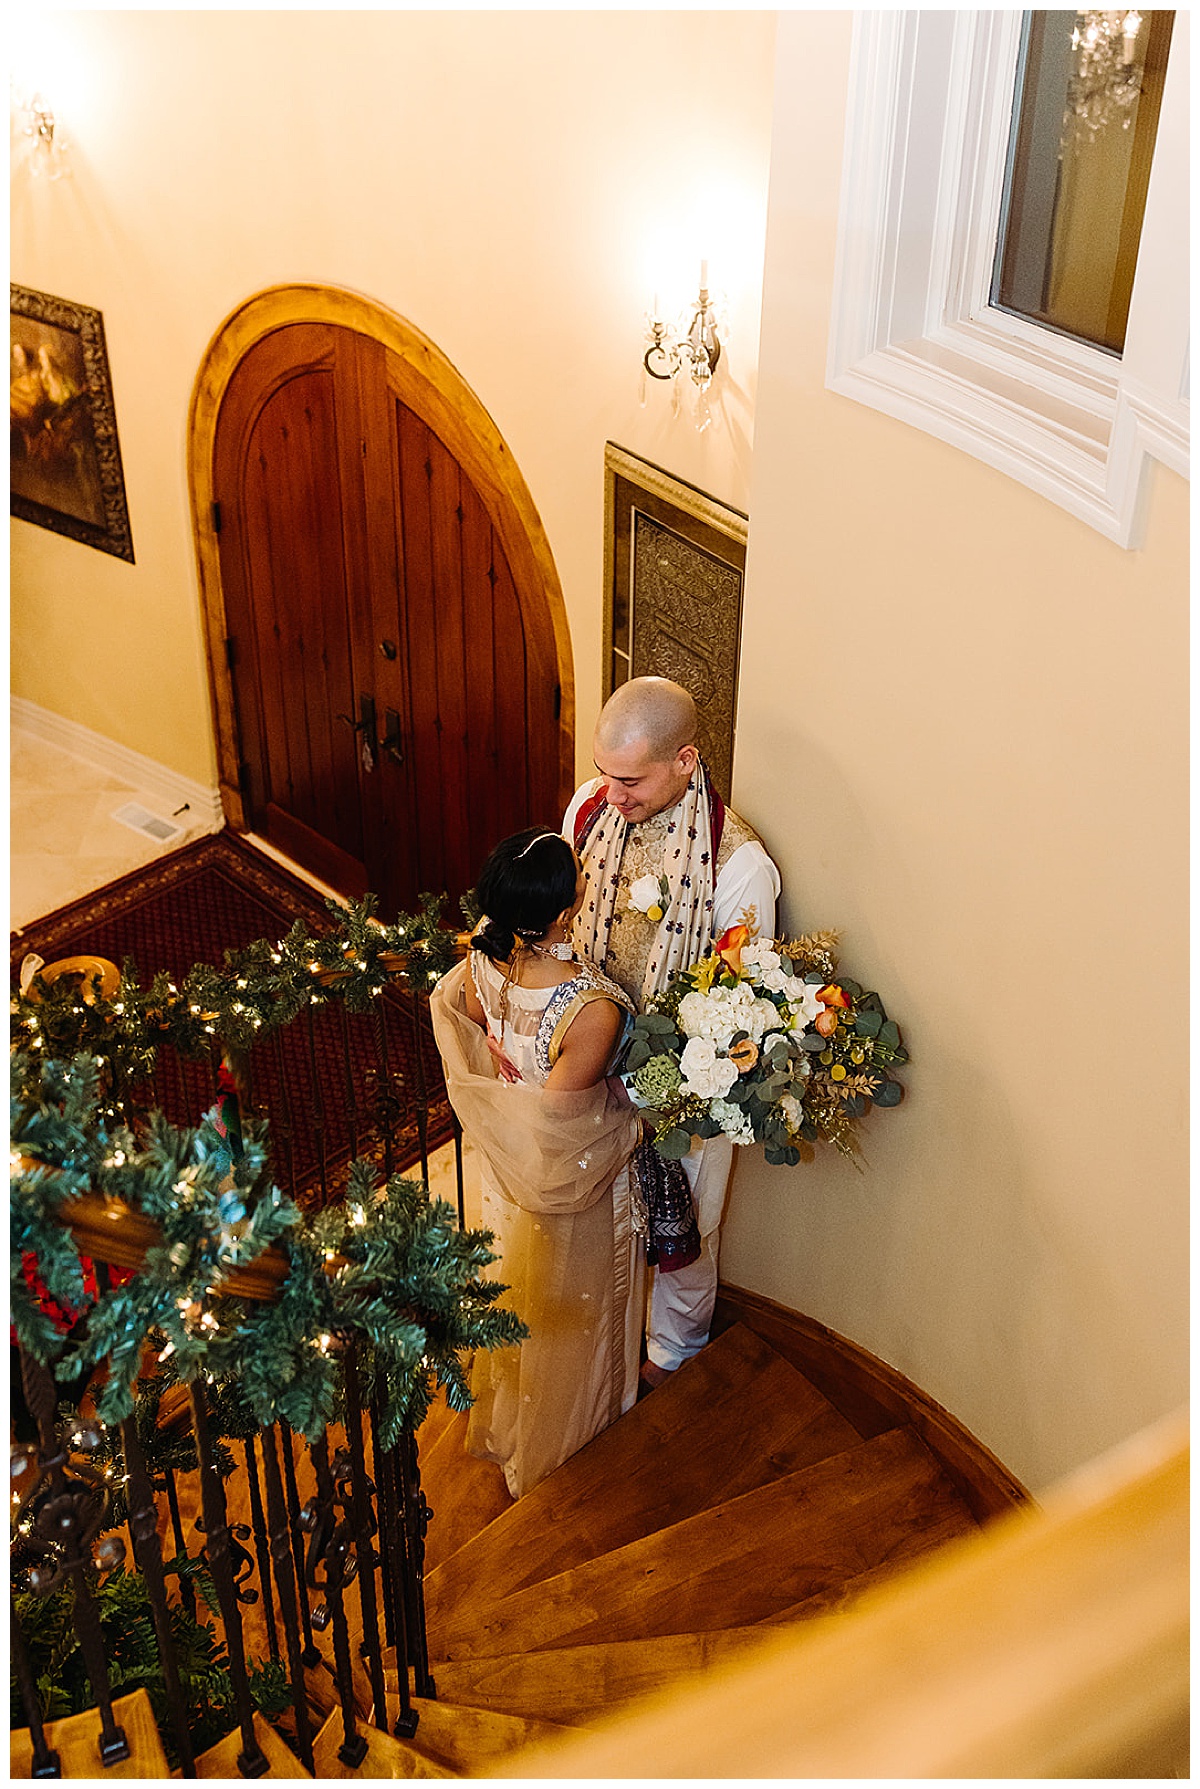 Bride and groom on staircase for Kayla Bouren Photography